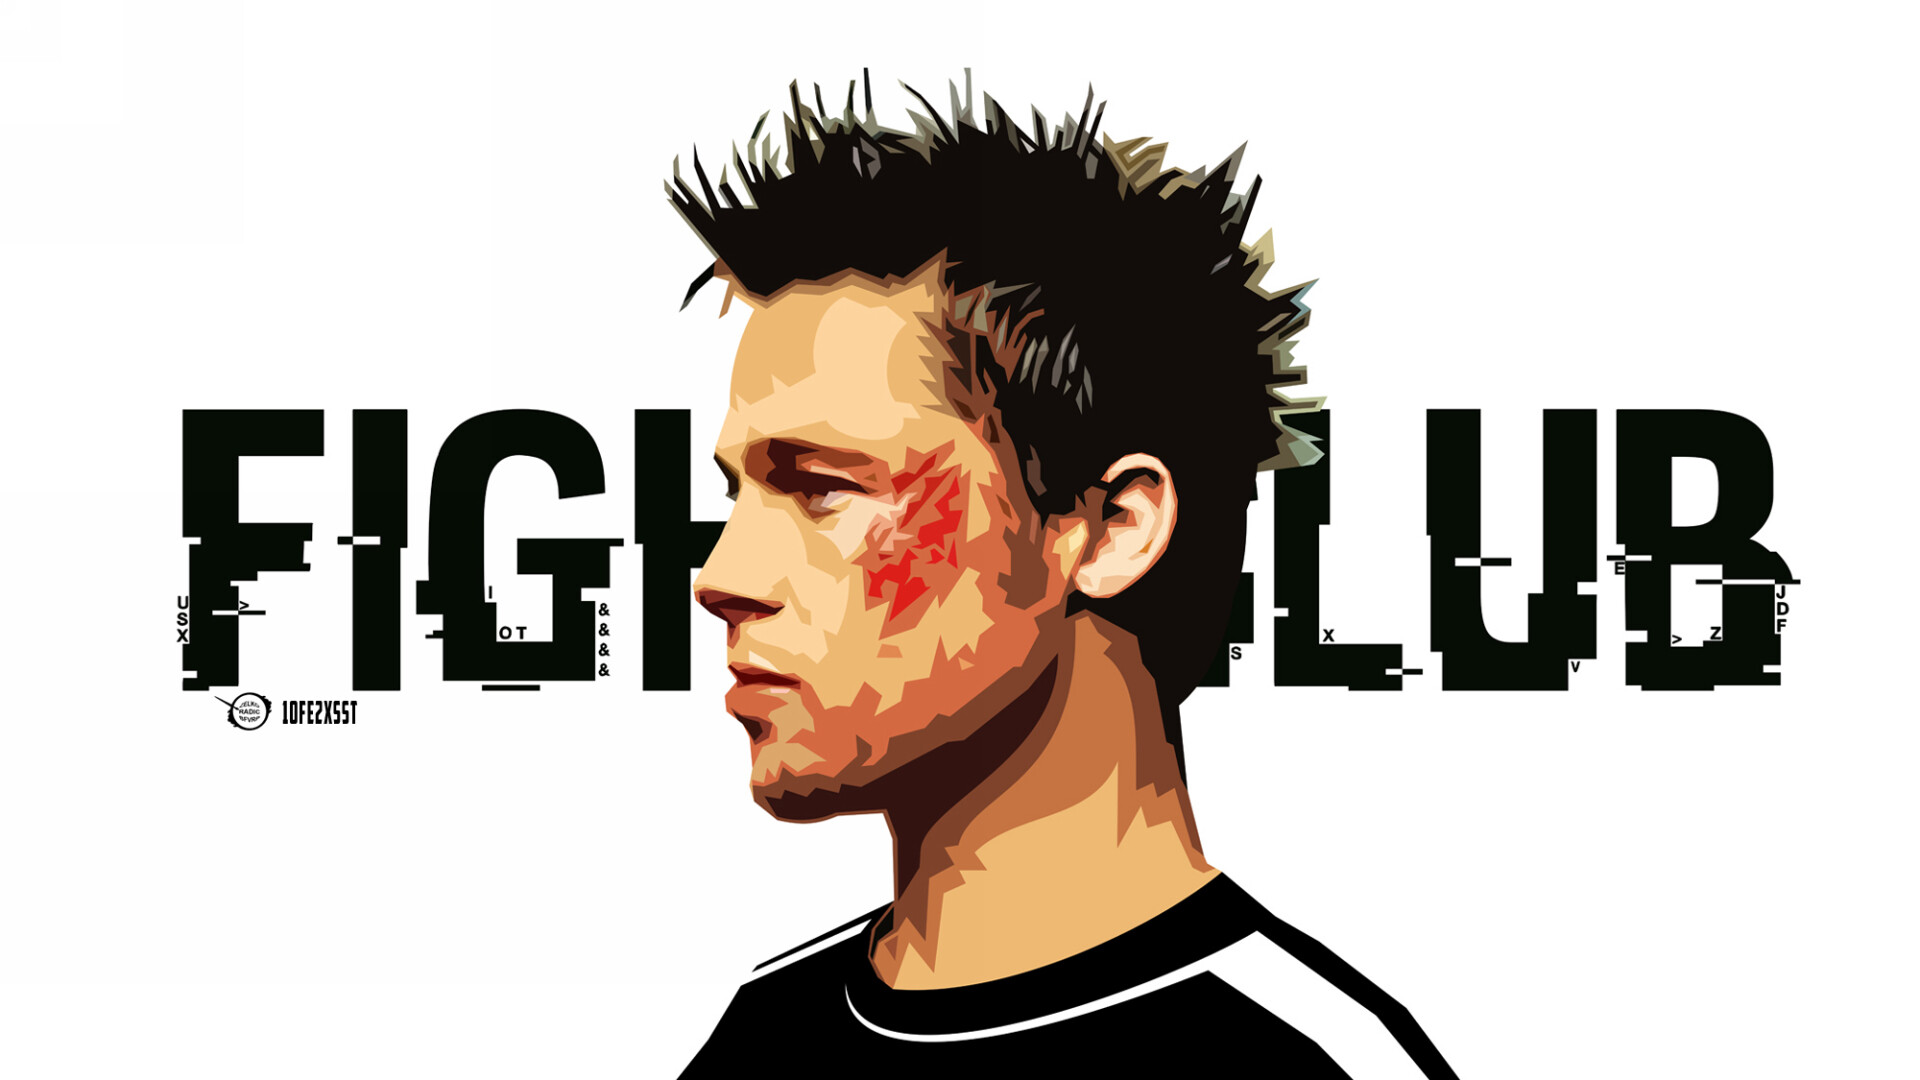 Fight Club: Tyler Durden (Pitt) is everything The Narrator wishes he was. 1920x1080 Full HD Wallpaper.